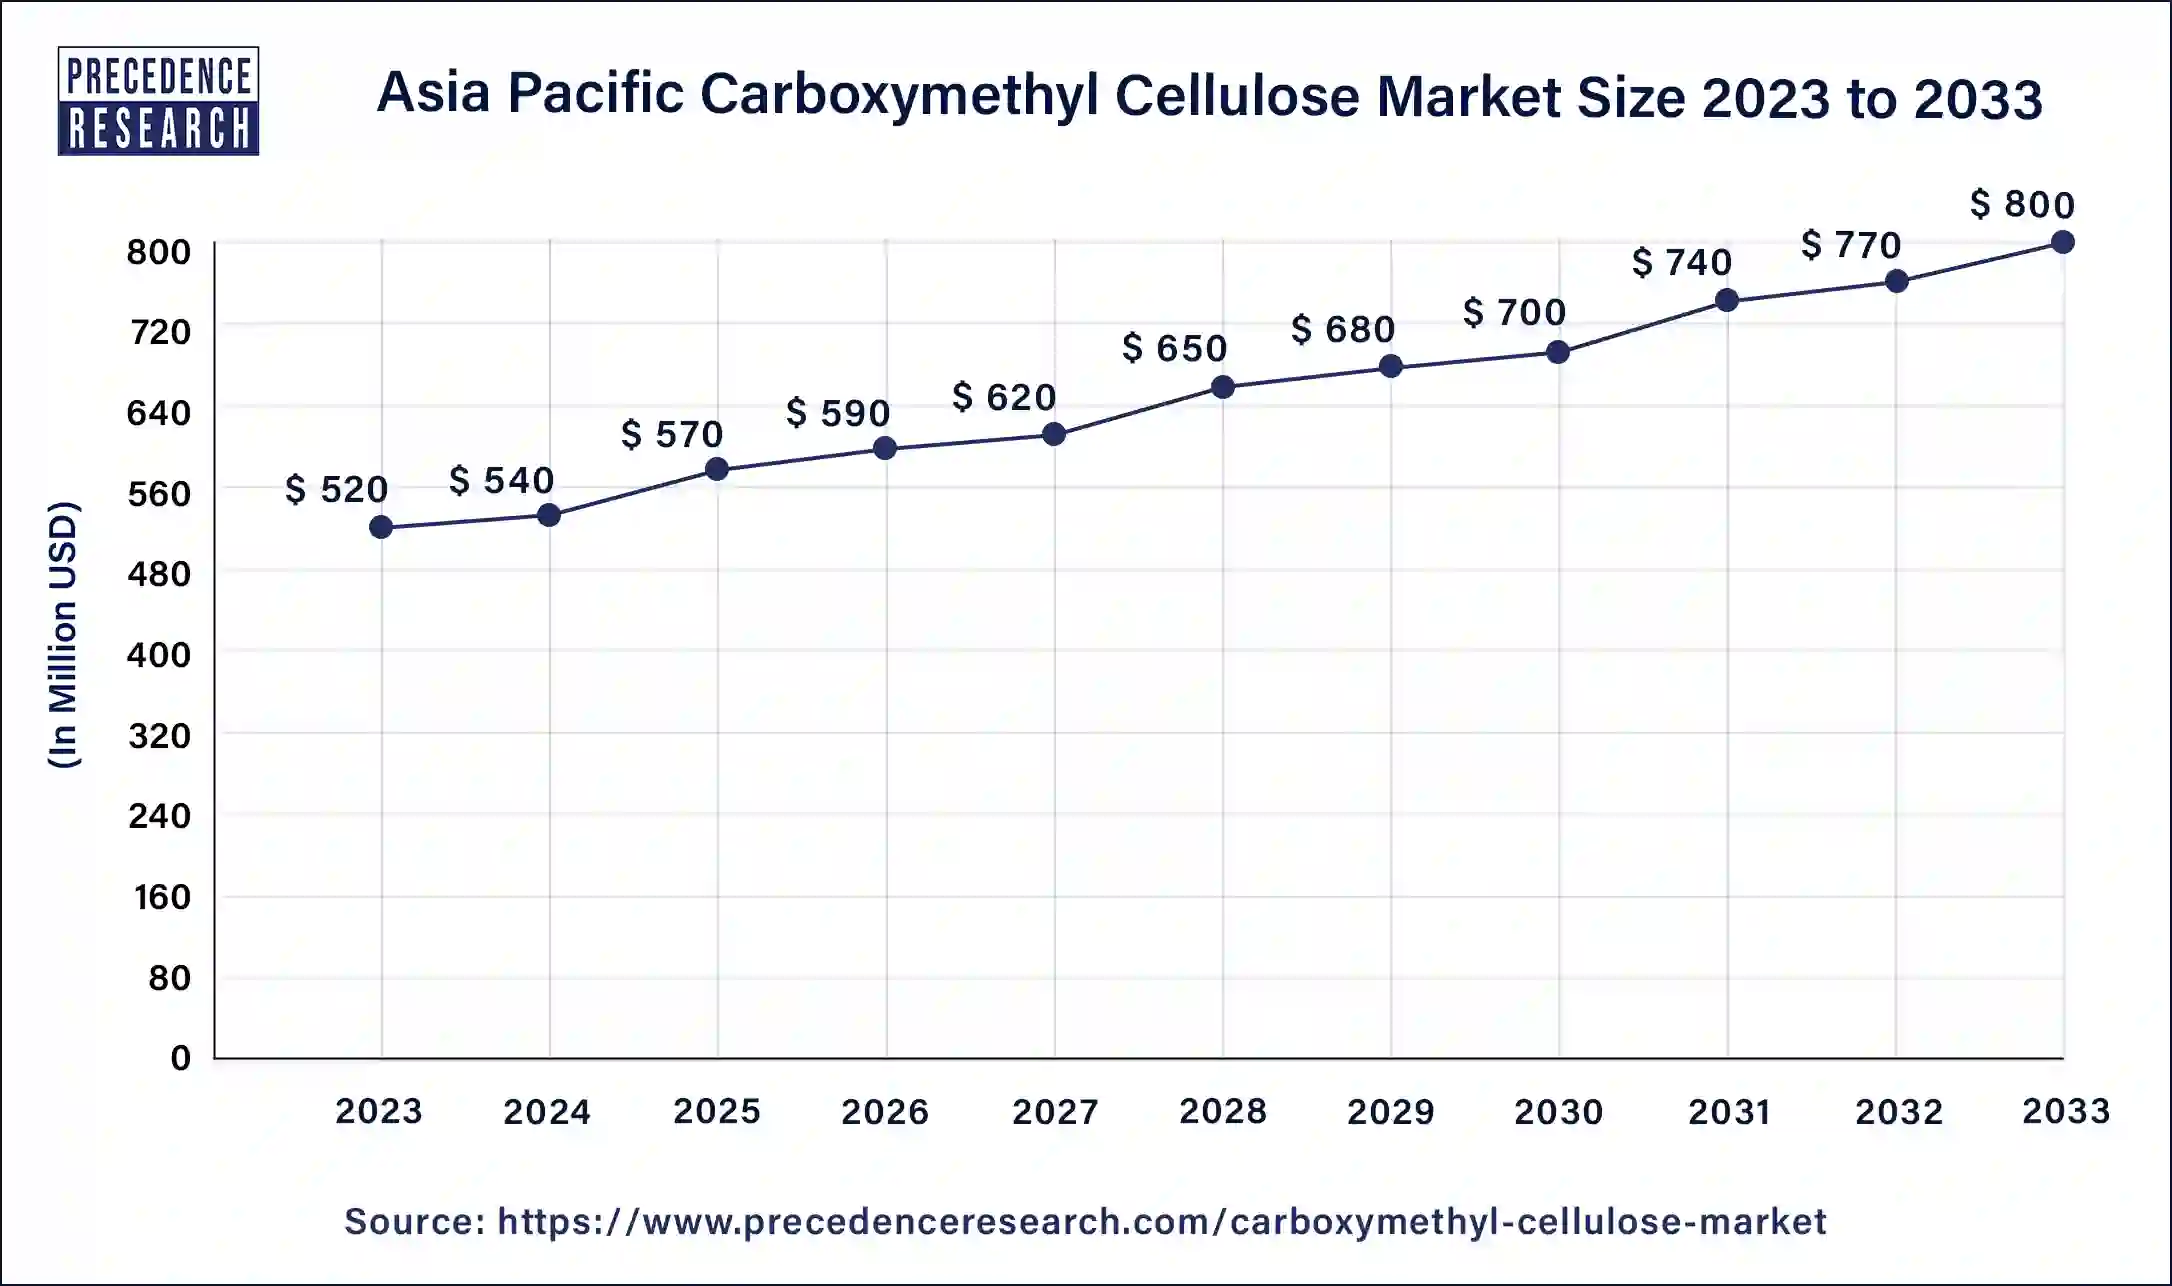 Asia Pacific Carboxymethyl Cellulose Market Size 2024 to 2033